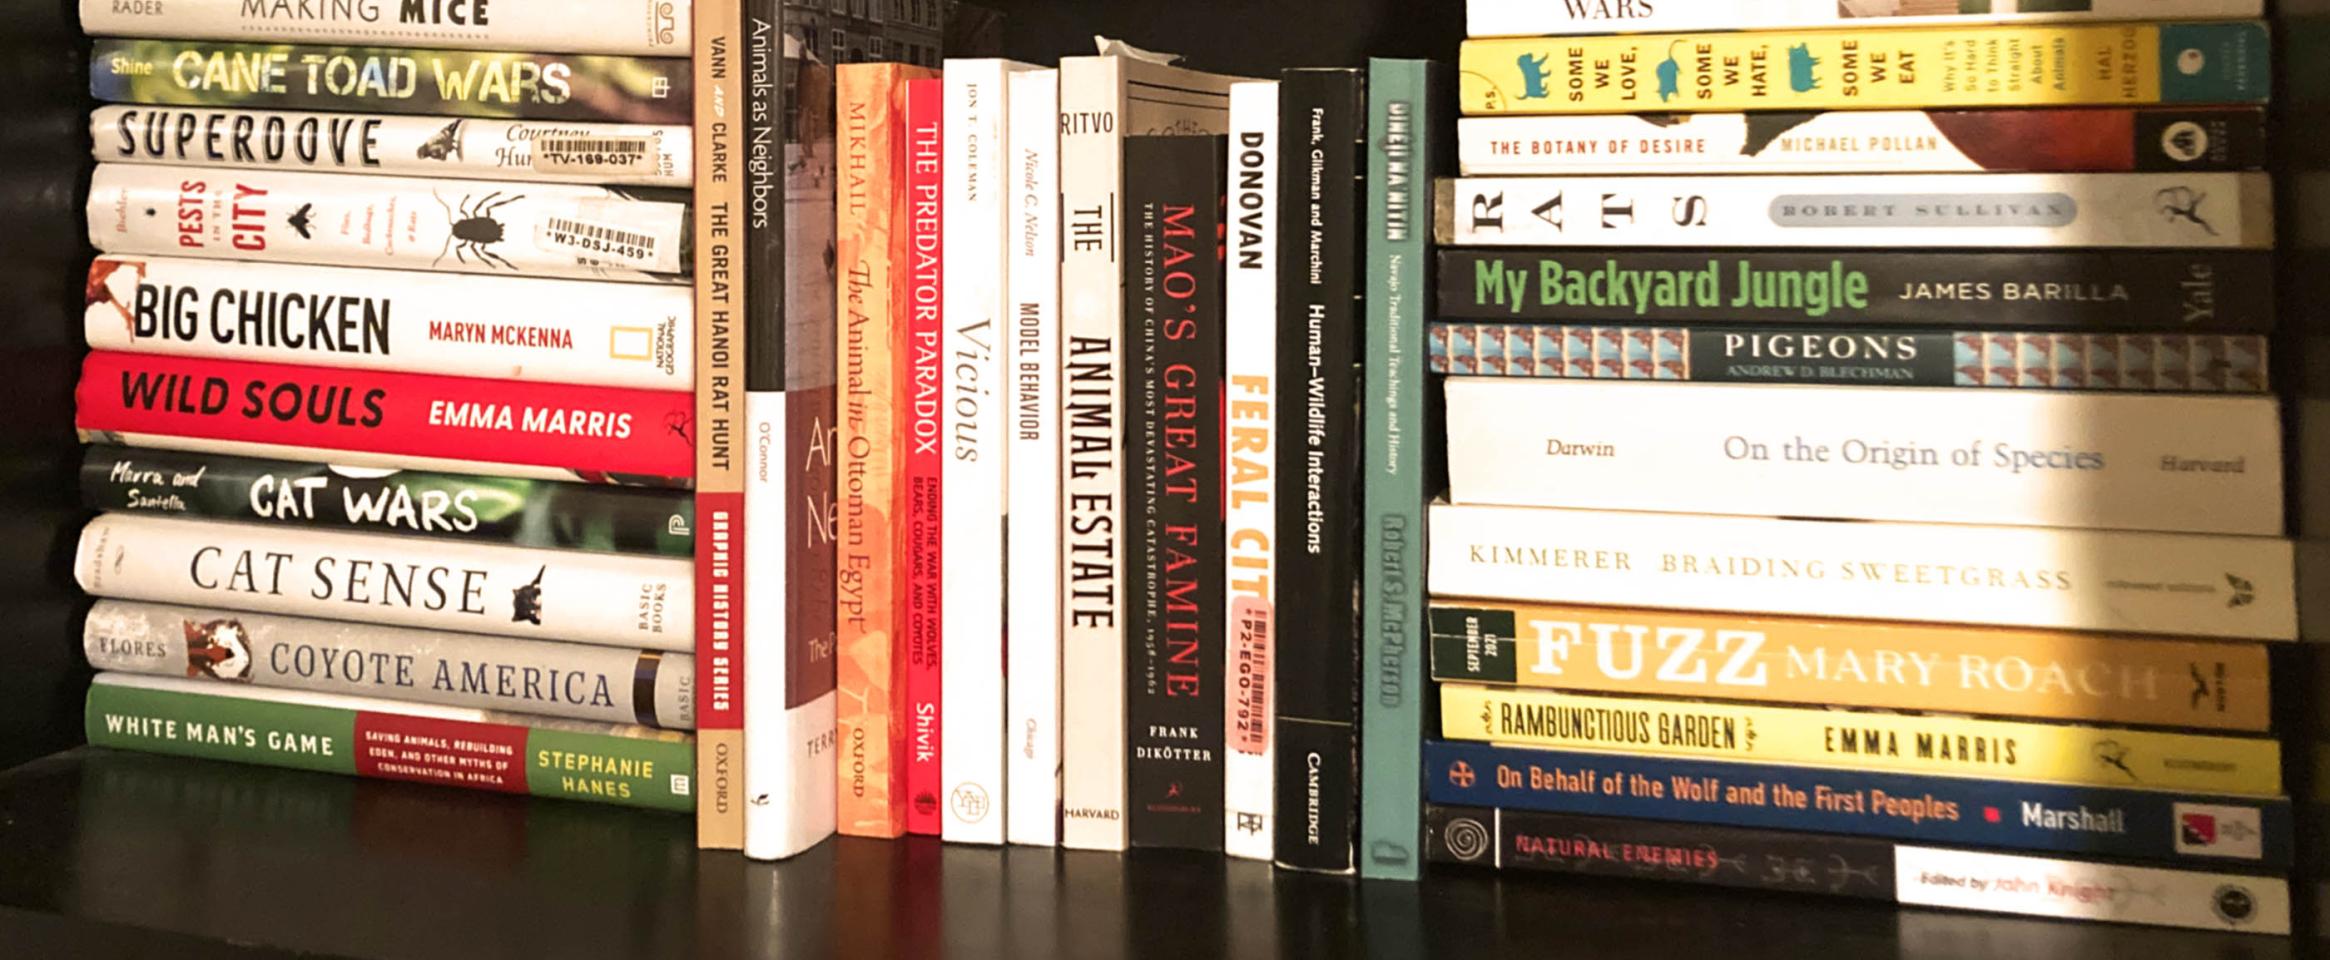 Horizontal photo of a bookshelf of Bethany Brookshire, with book titles stacked vertically and horizontally.